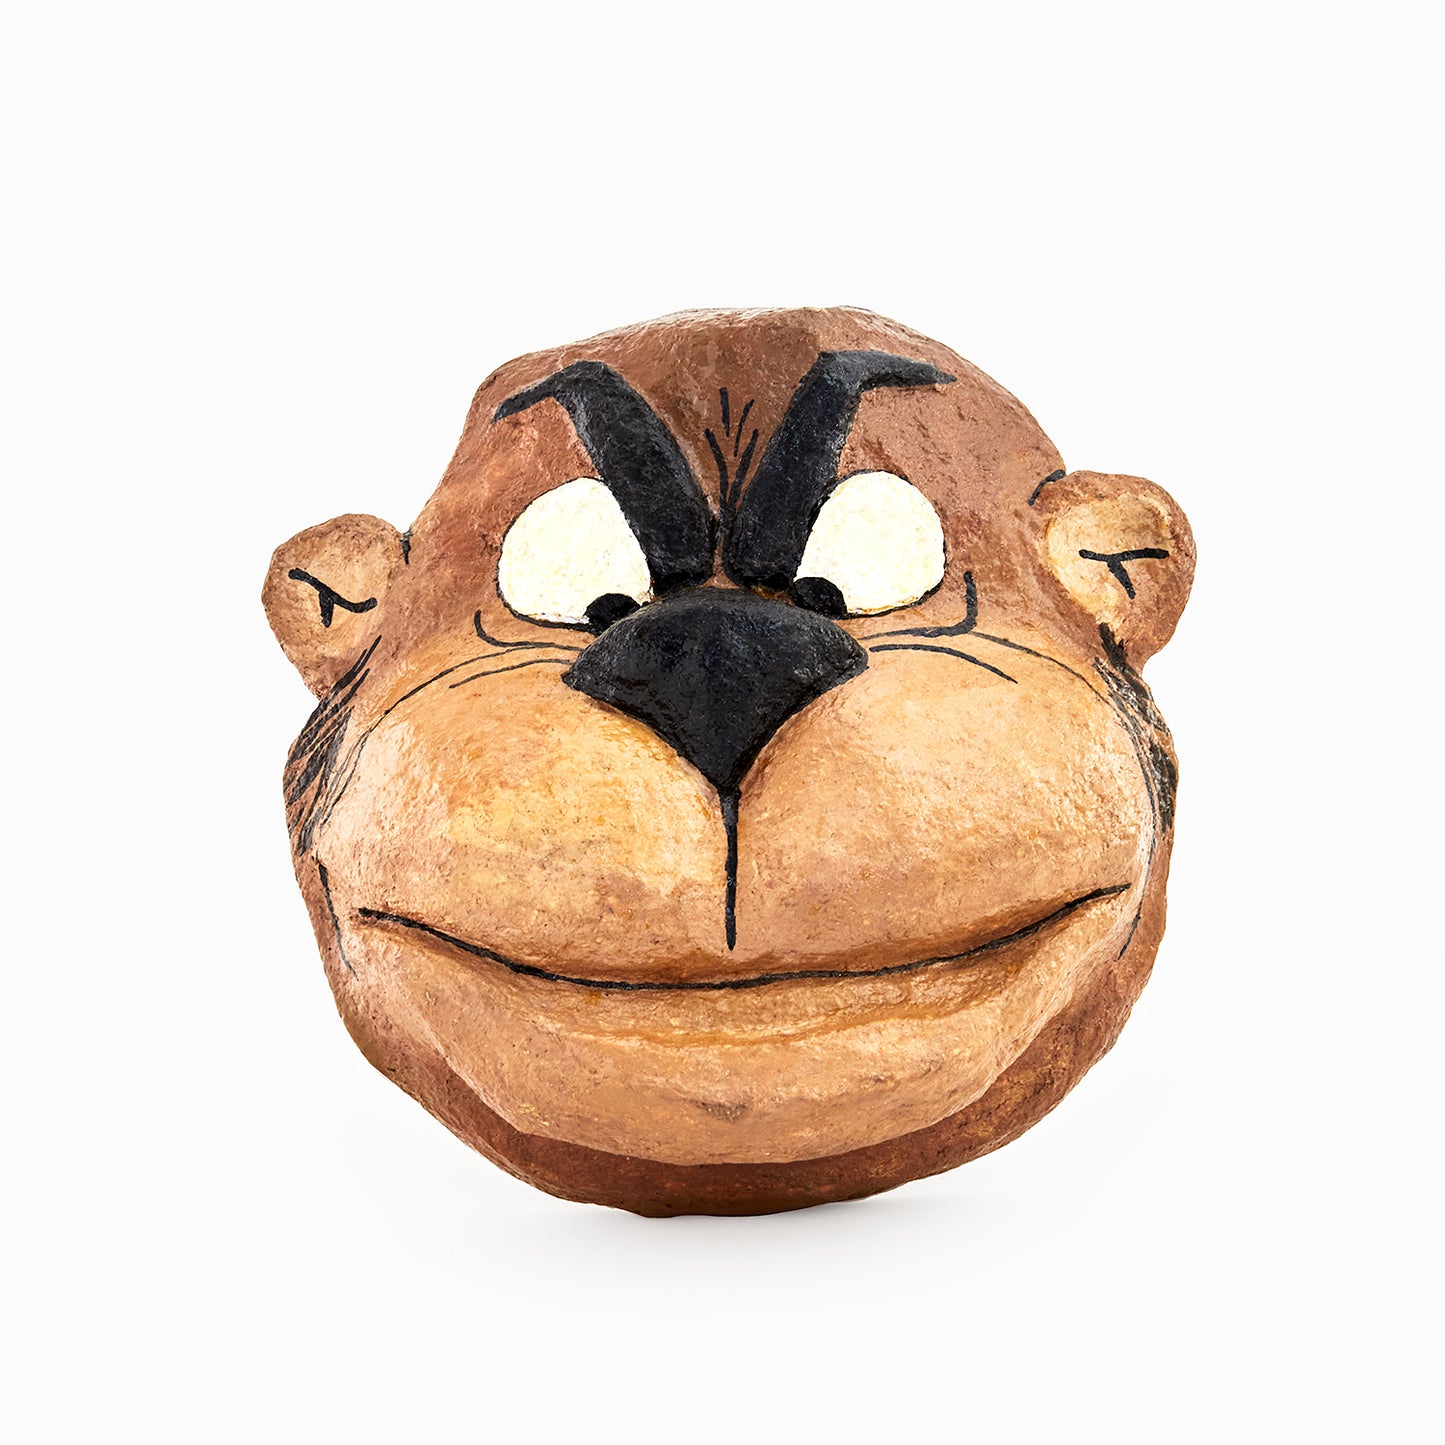 Monkey - Face Mask for Wall Hanging